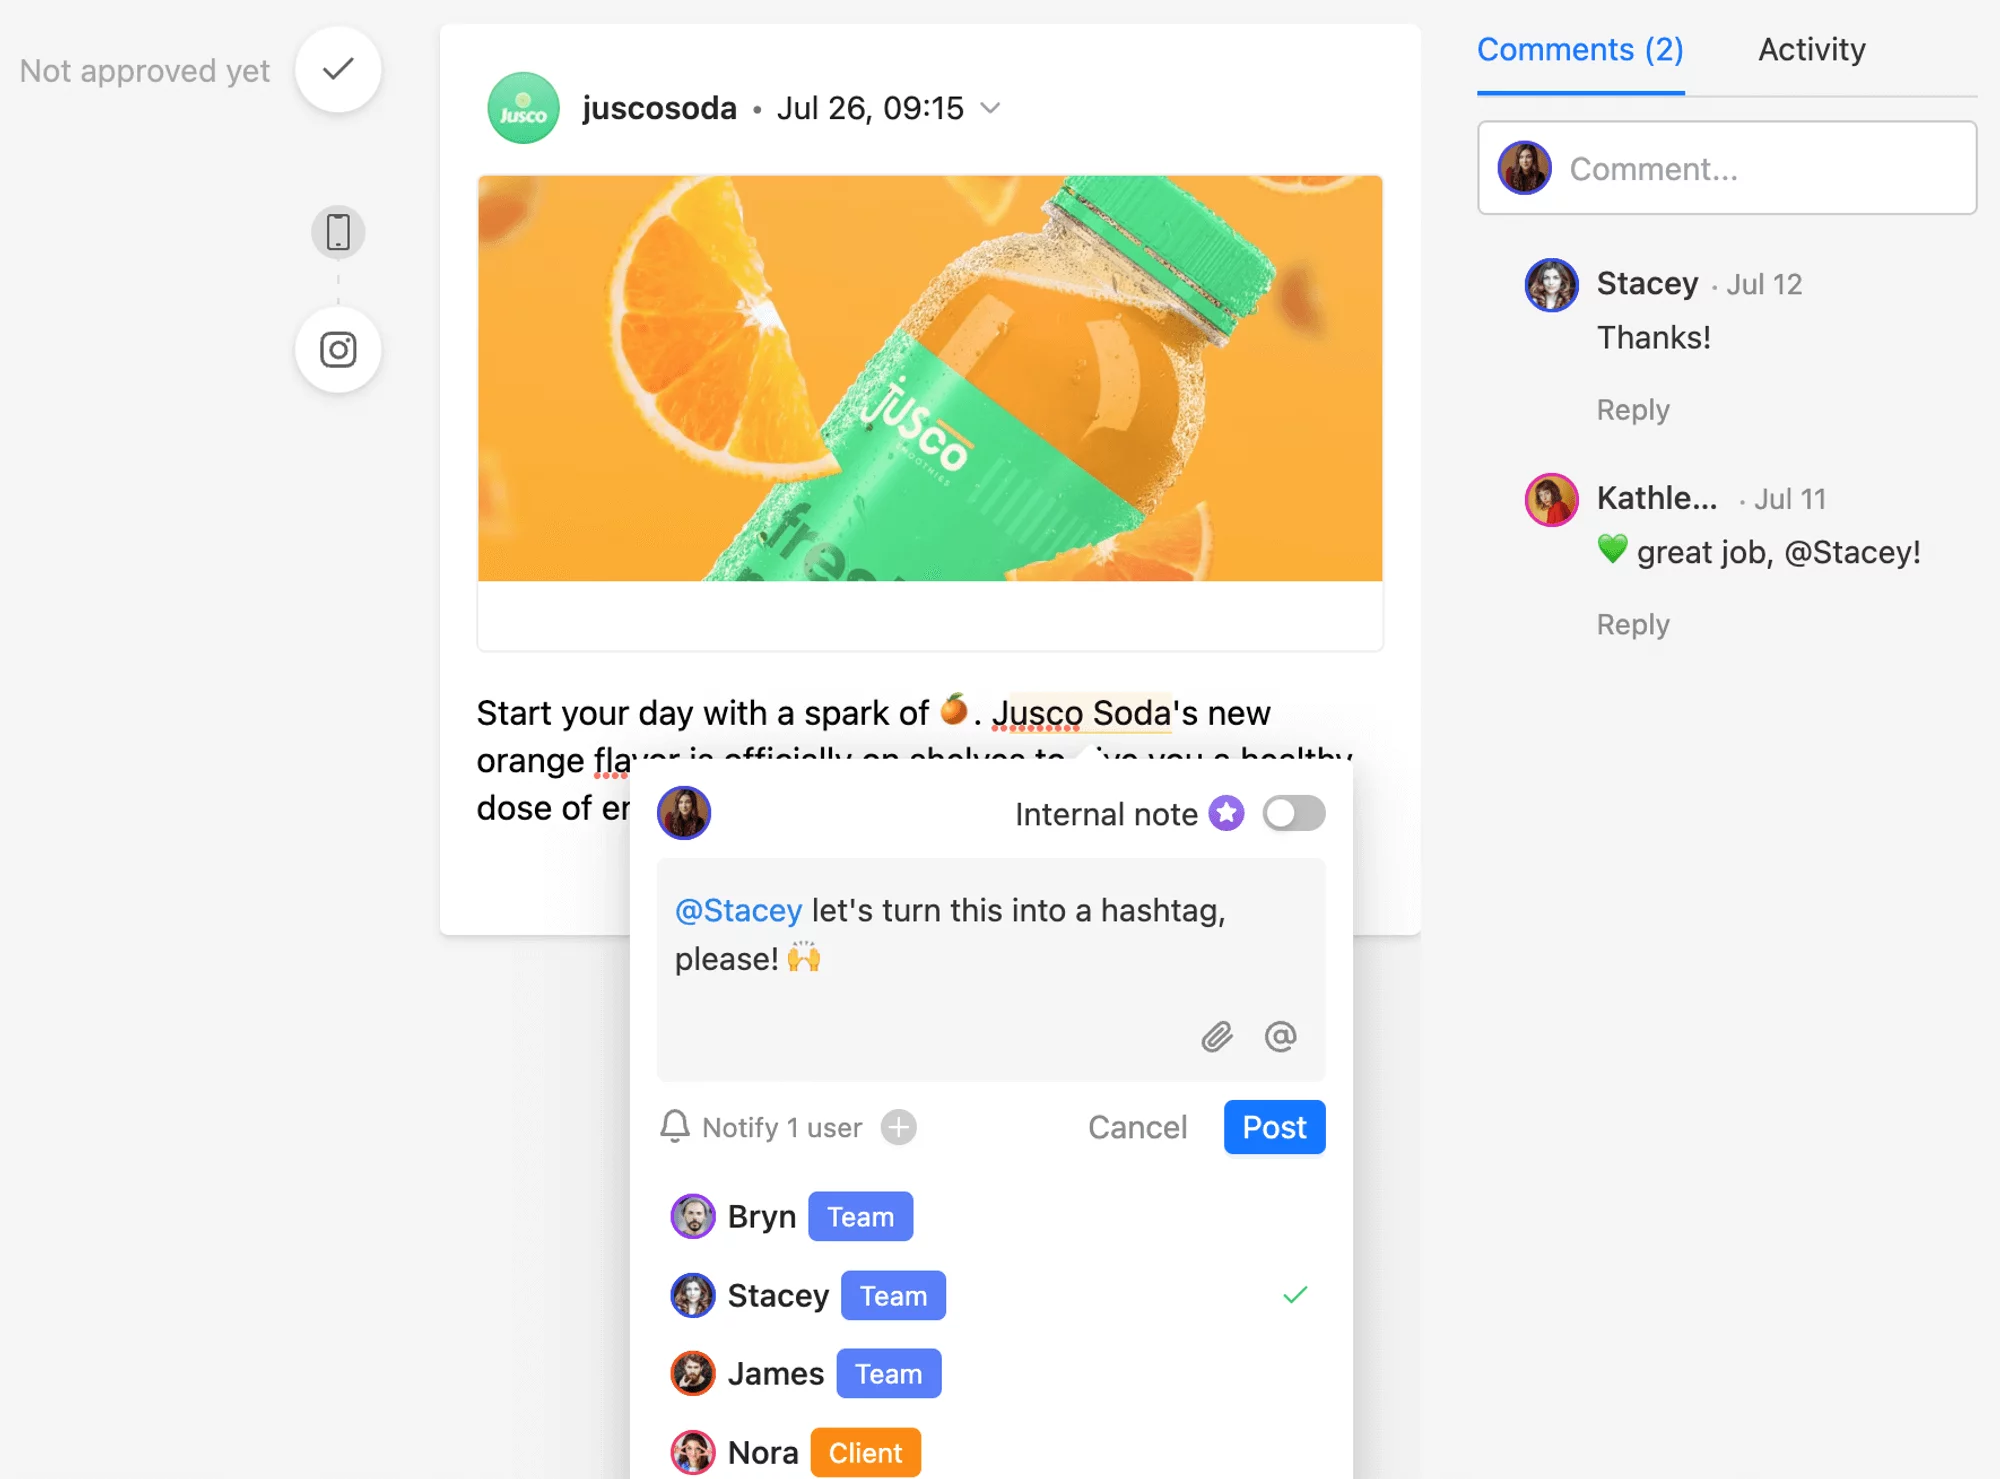 IG post draft of Jusco Soda's new orange flavor, with comments and team collaboration tools visible.